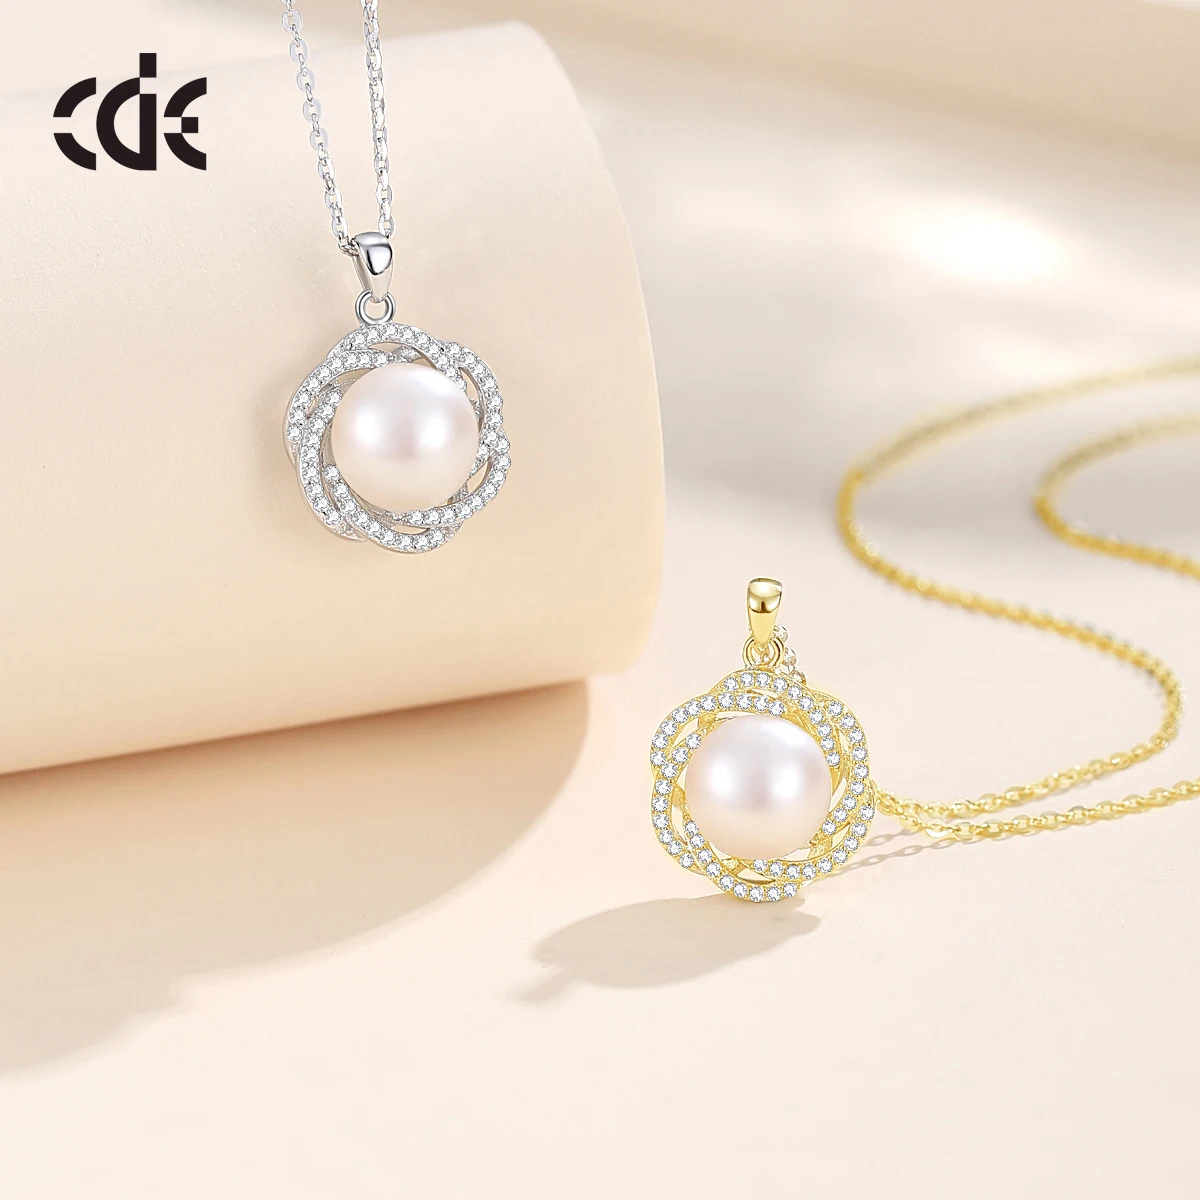 CDE PRYN002 Jewelry Necklace Fine 925 Sterling Silver 14K Gold Plated Necklace Wholesale Women Pearl Flower Pendant Necklace